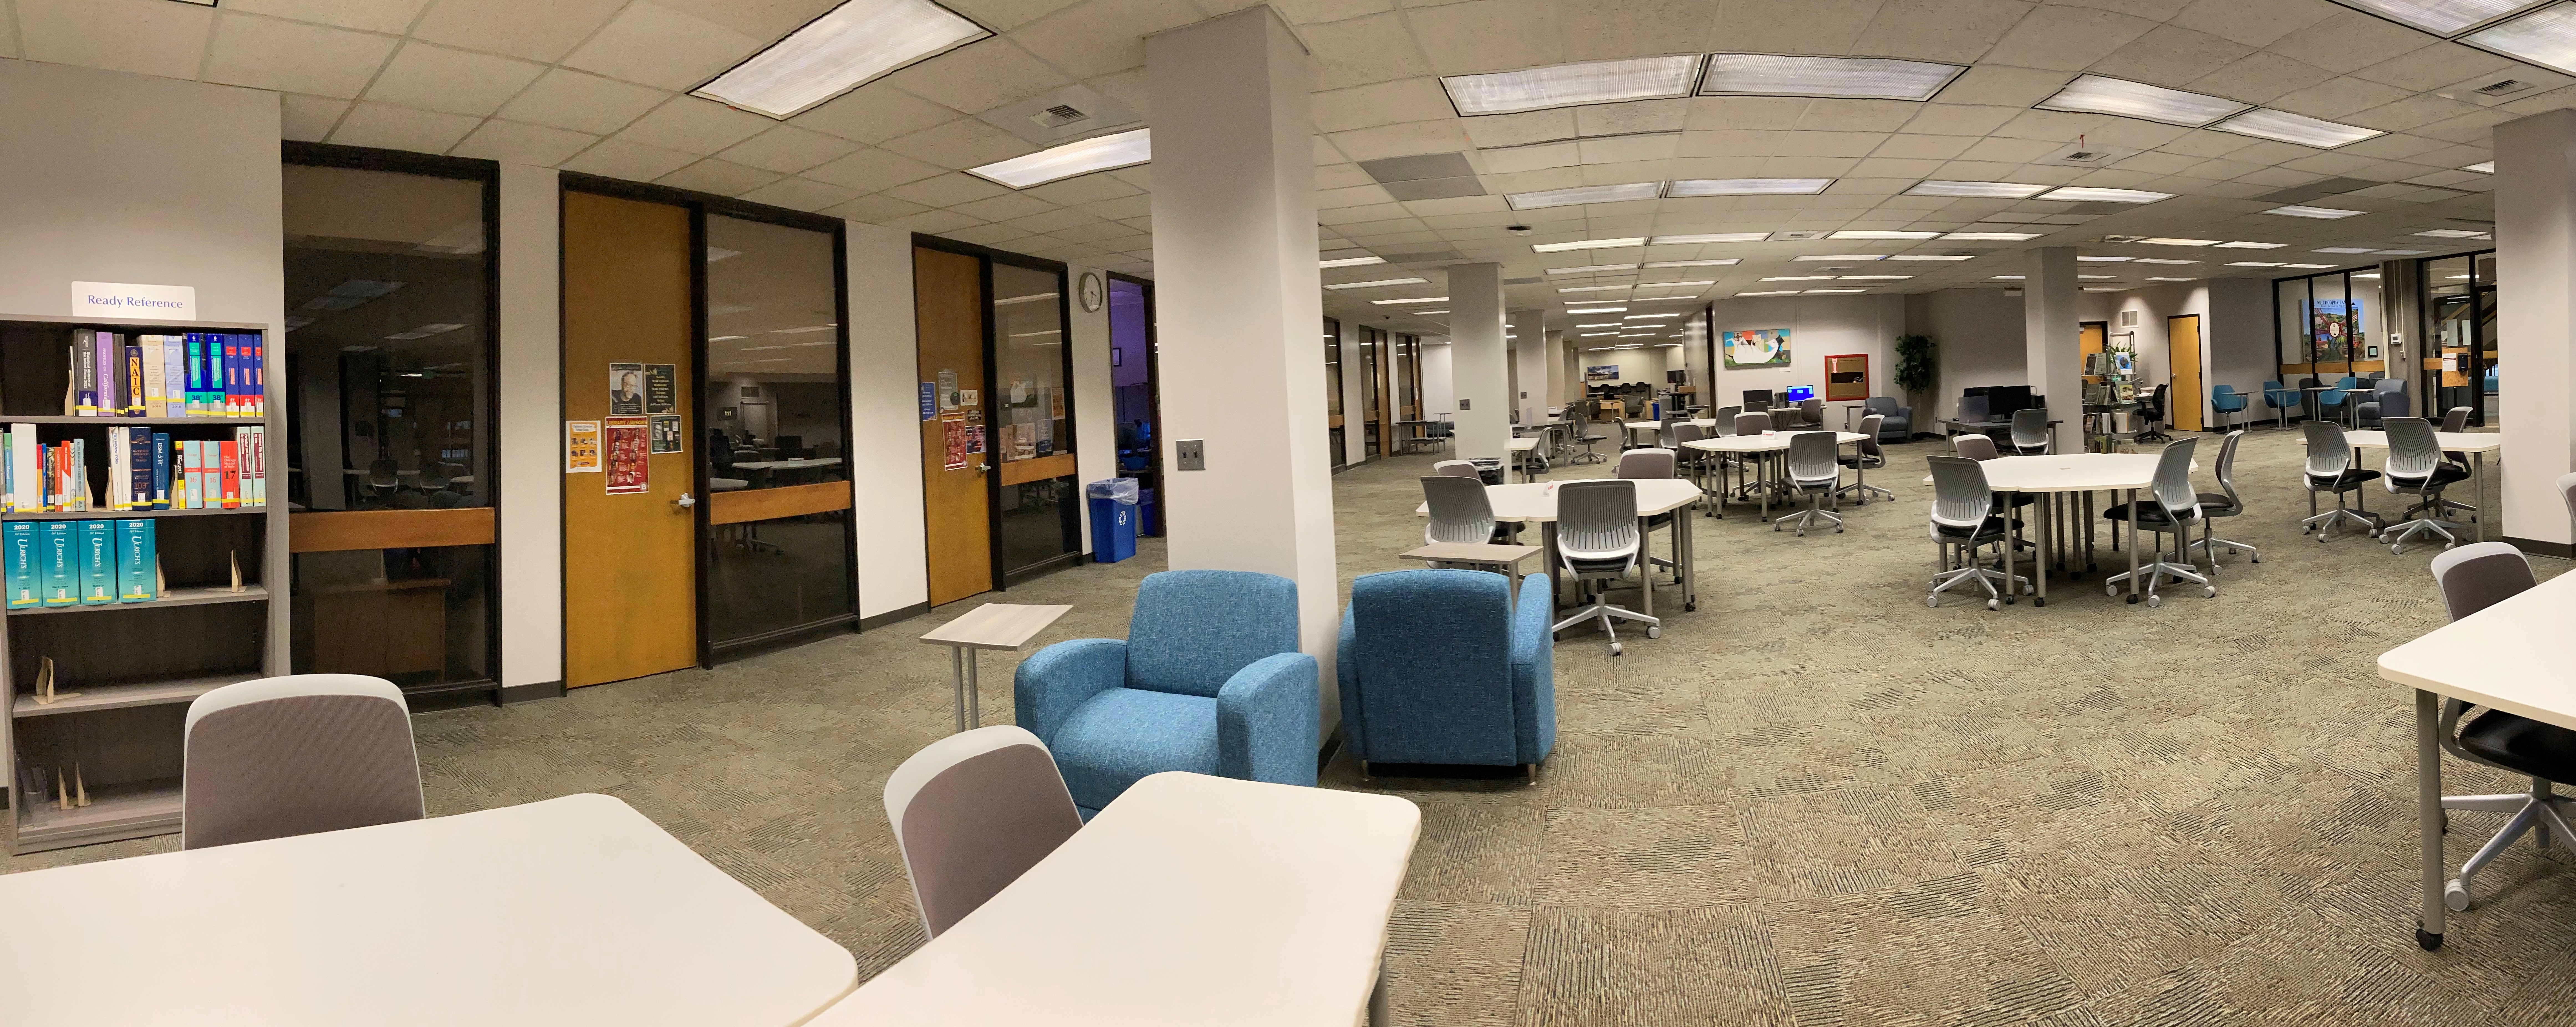 Research Commons panorama